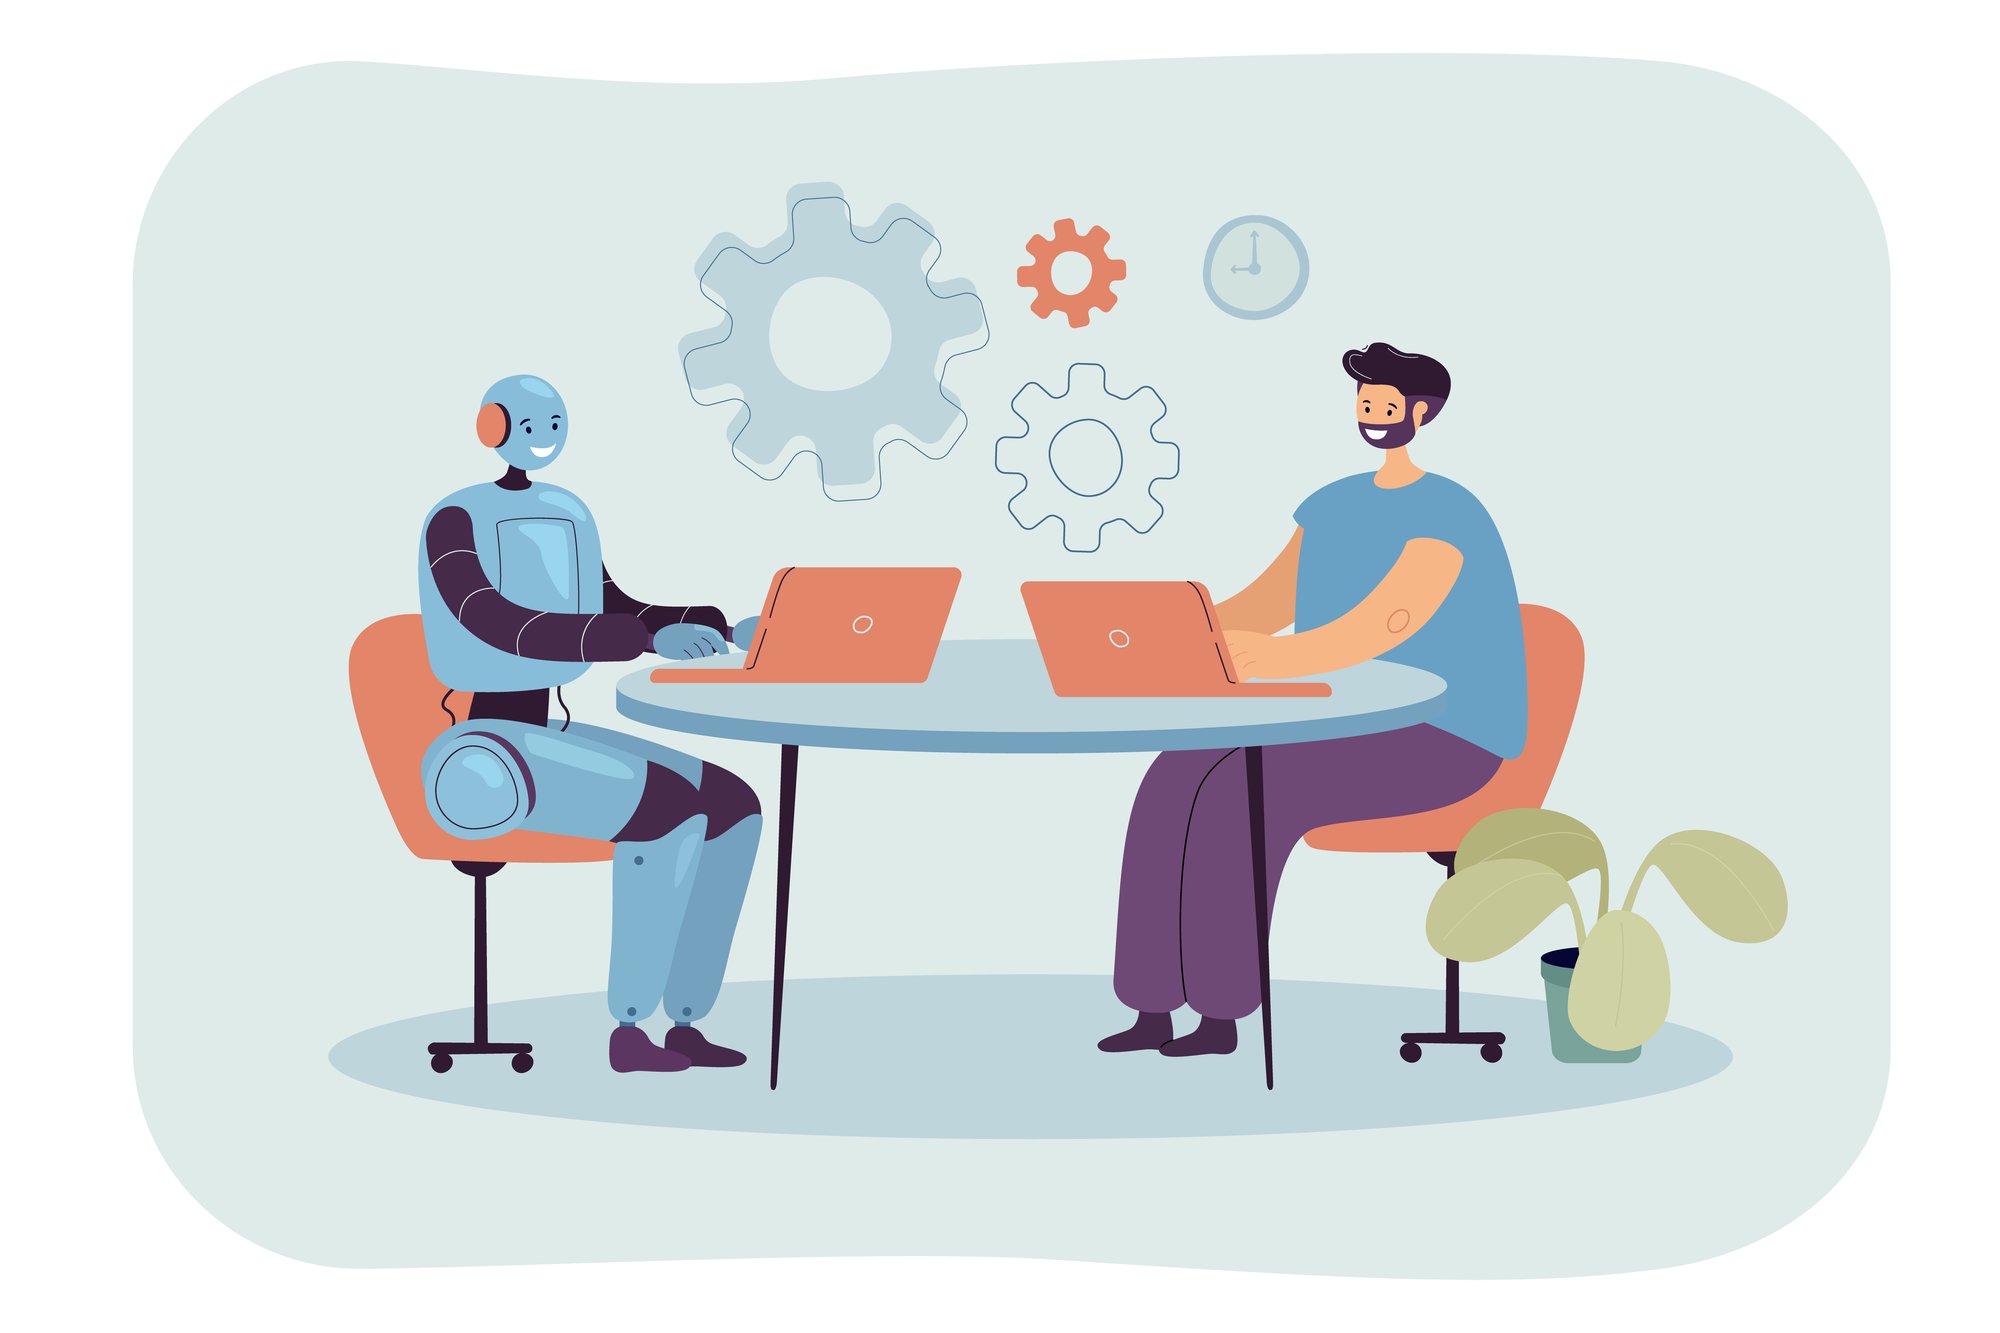 Cartoon man and robot sitting at laptops in workplace together